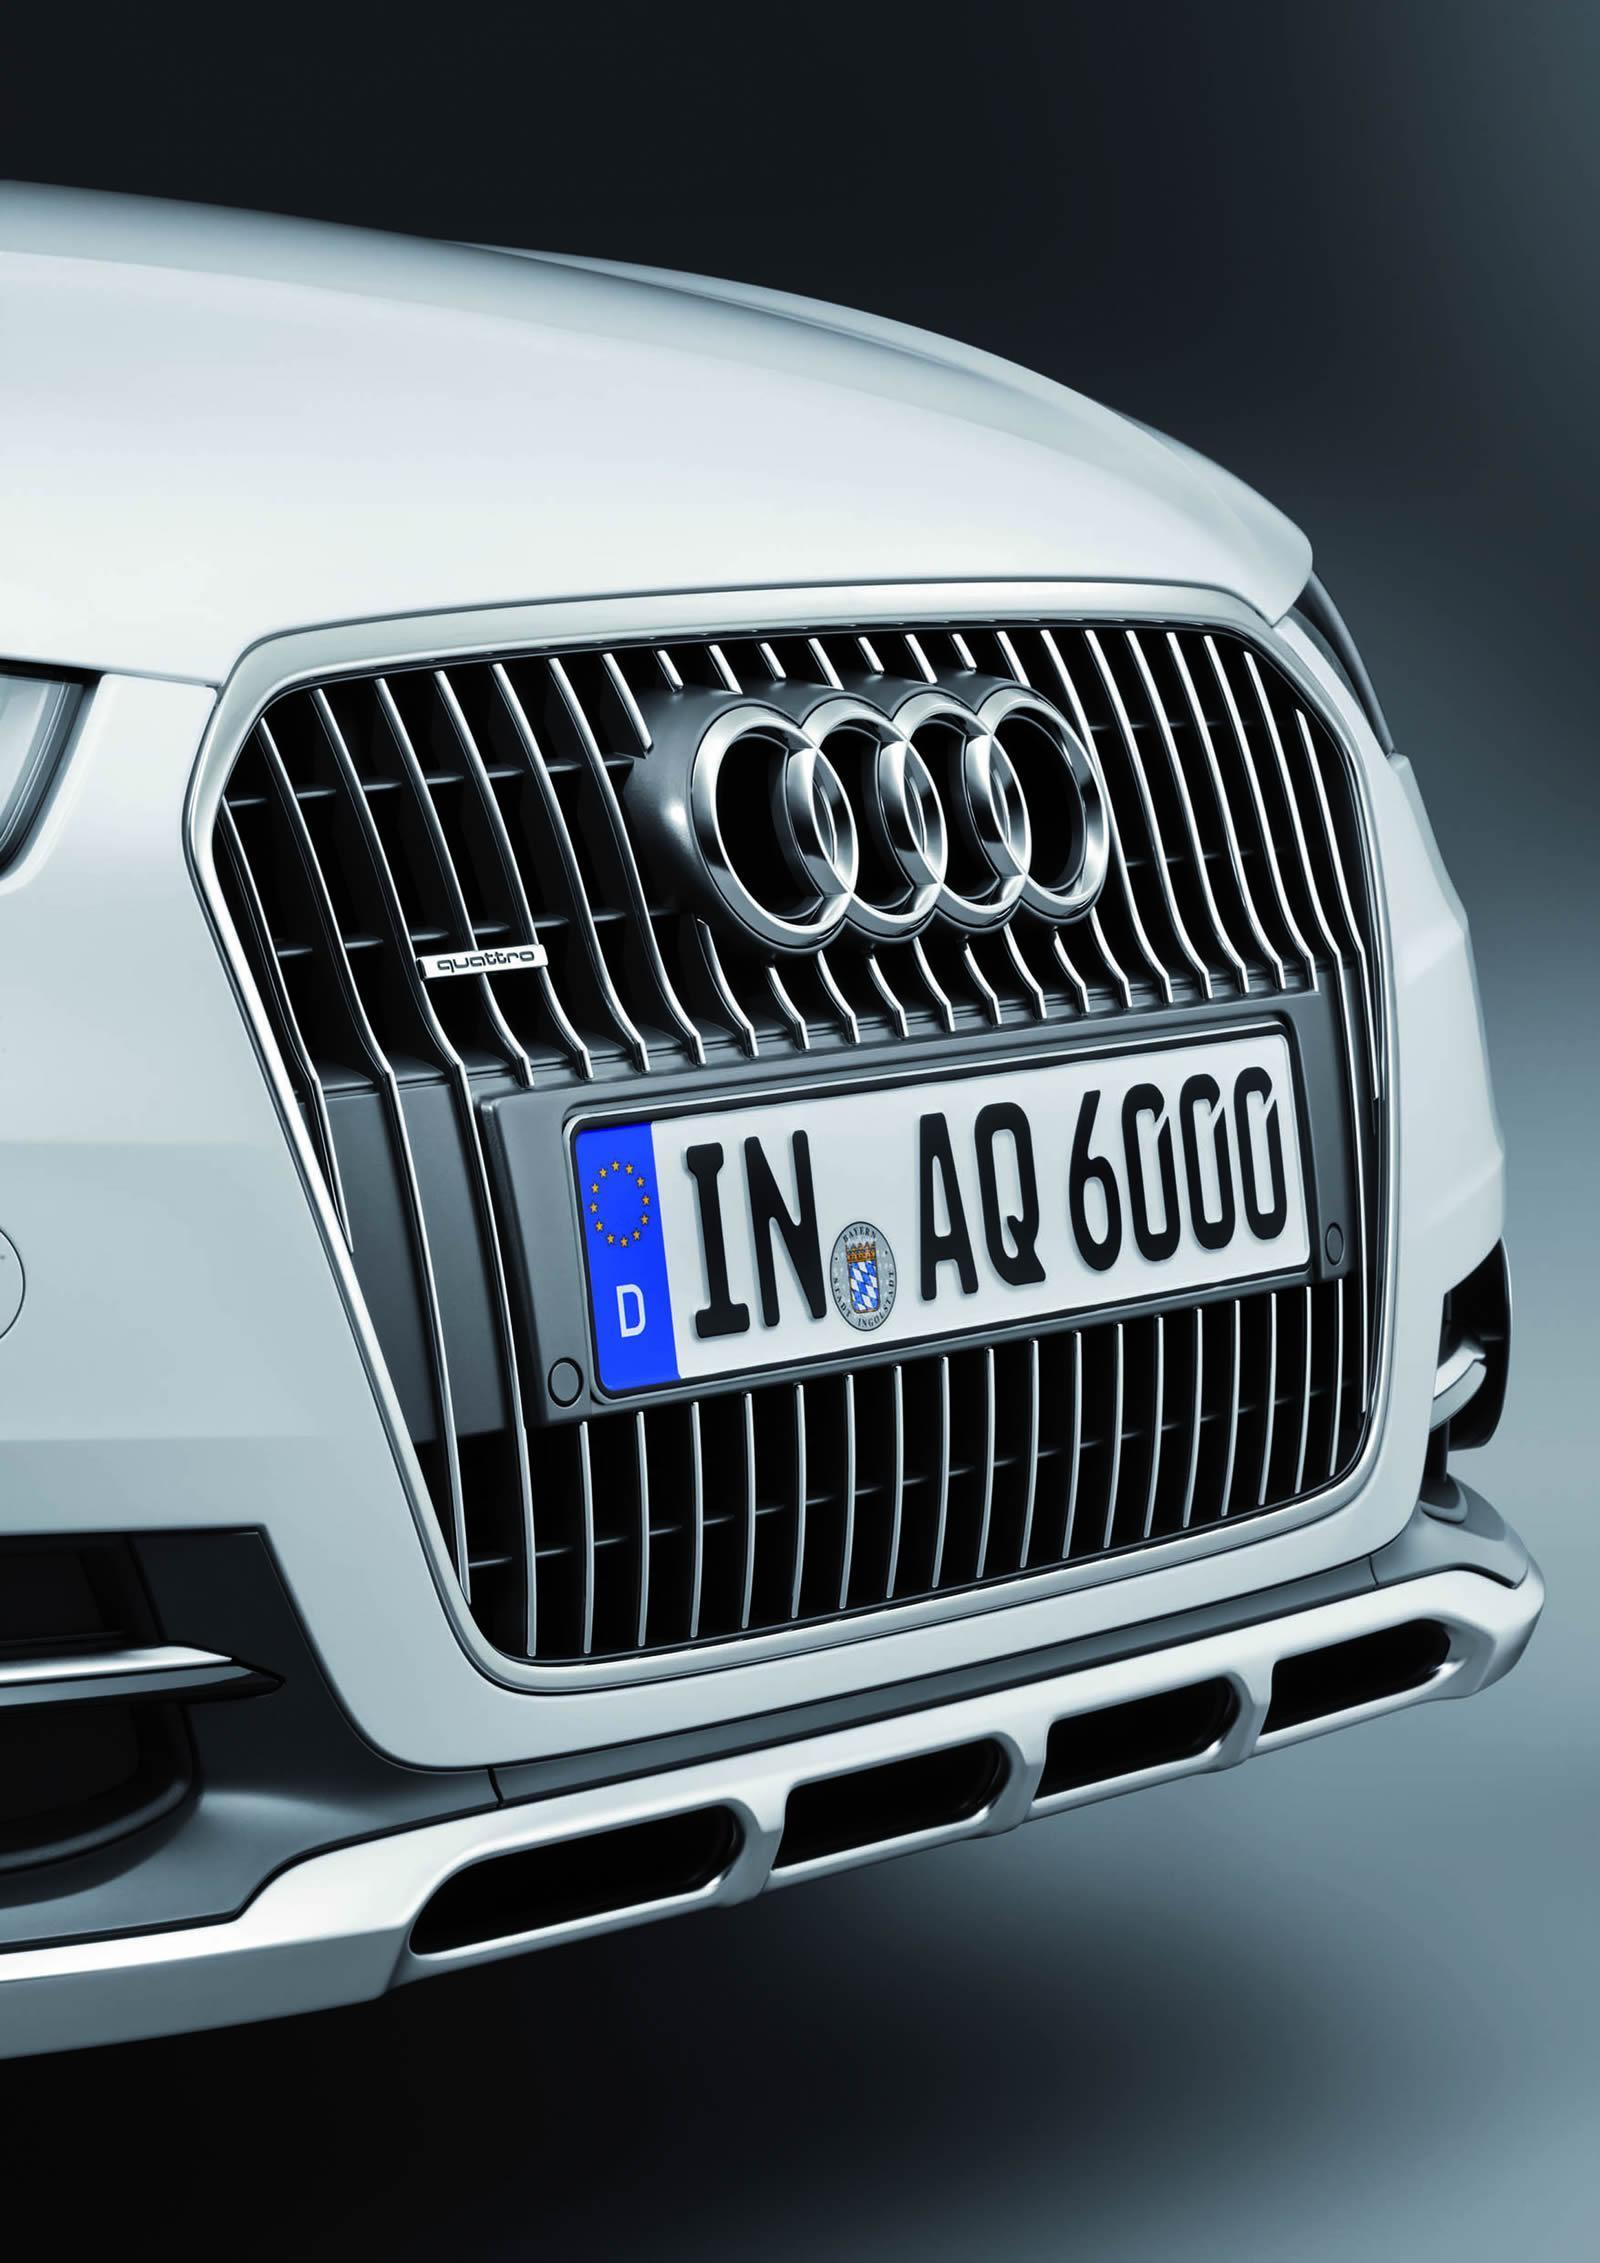 Audi A6 Allroad Hd Wallpapers For Laptop